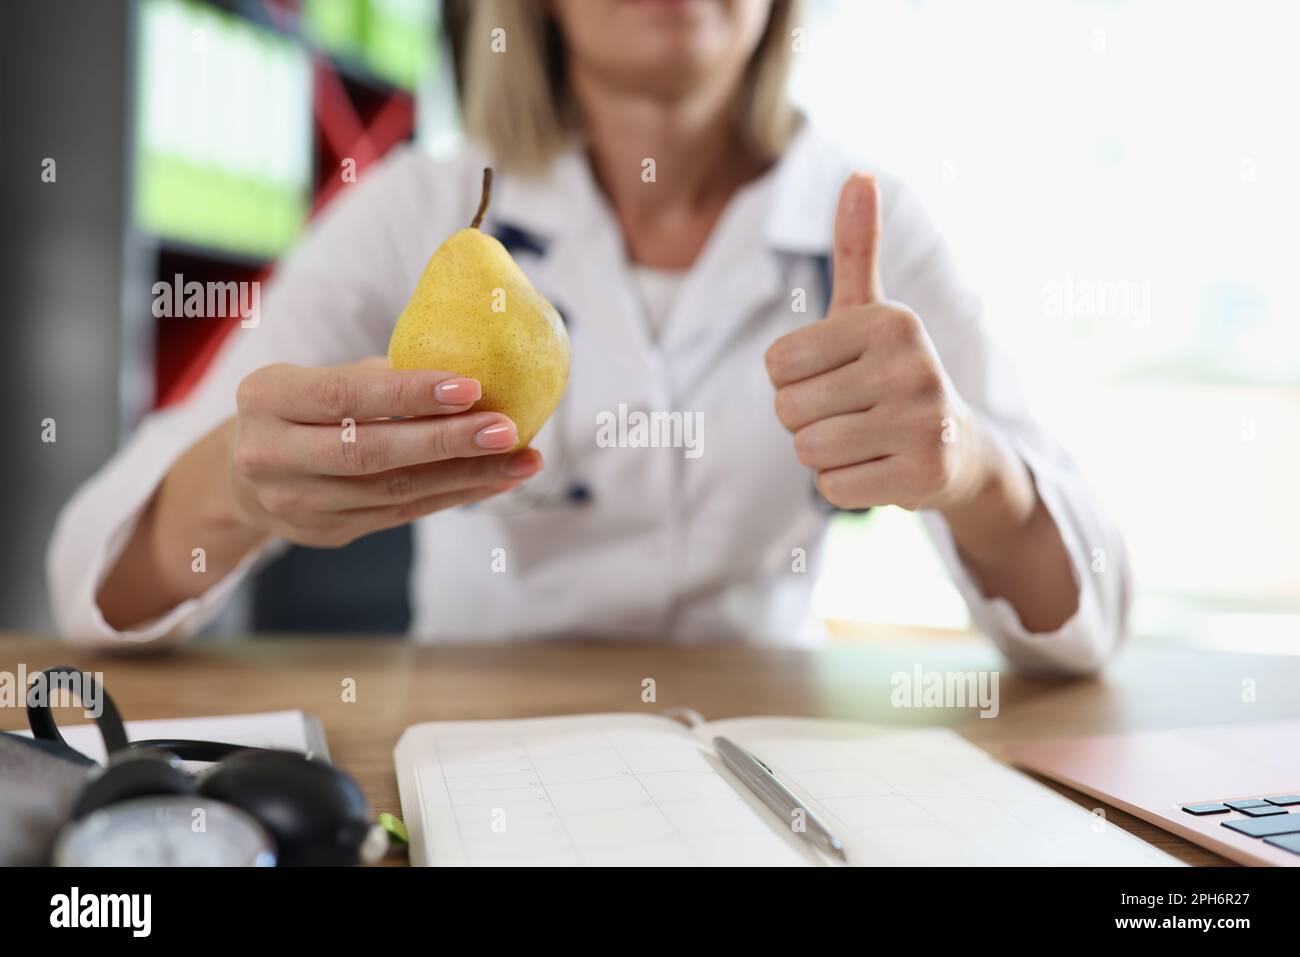 Doctor holds ripe pear in hand making thumb up gesture Stock Photo